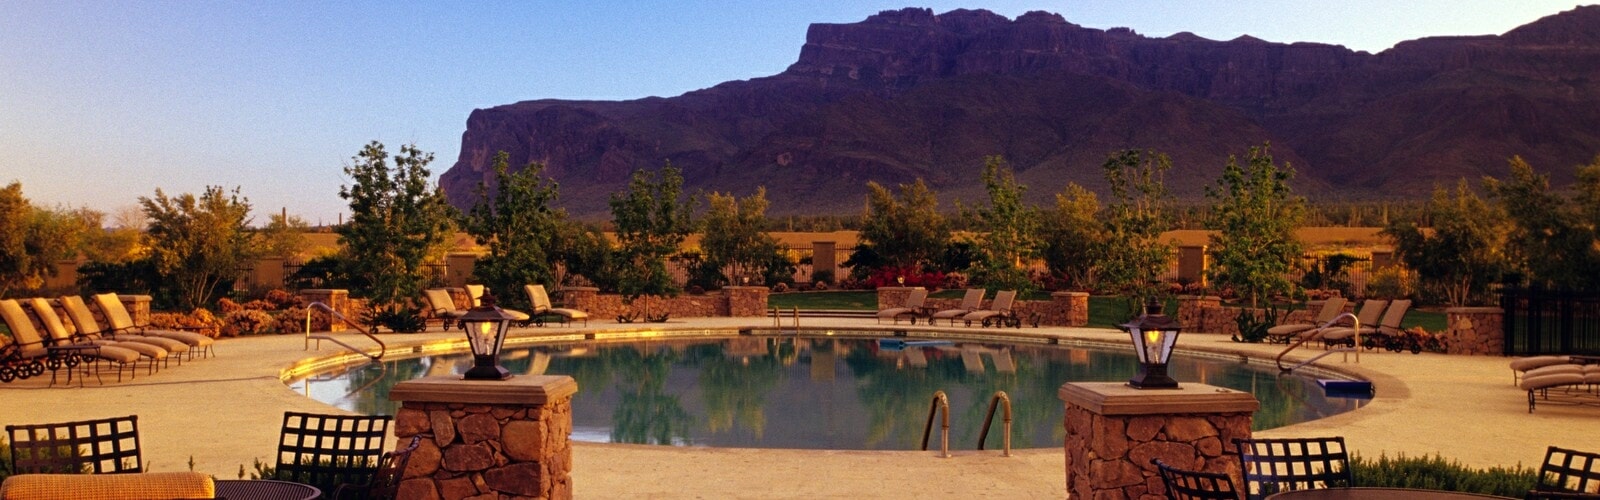 superstition-mountain-sports-club-pool